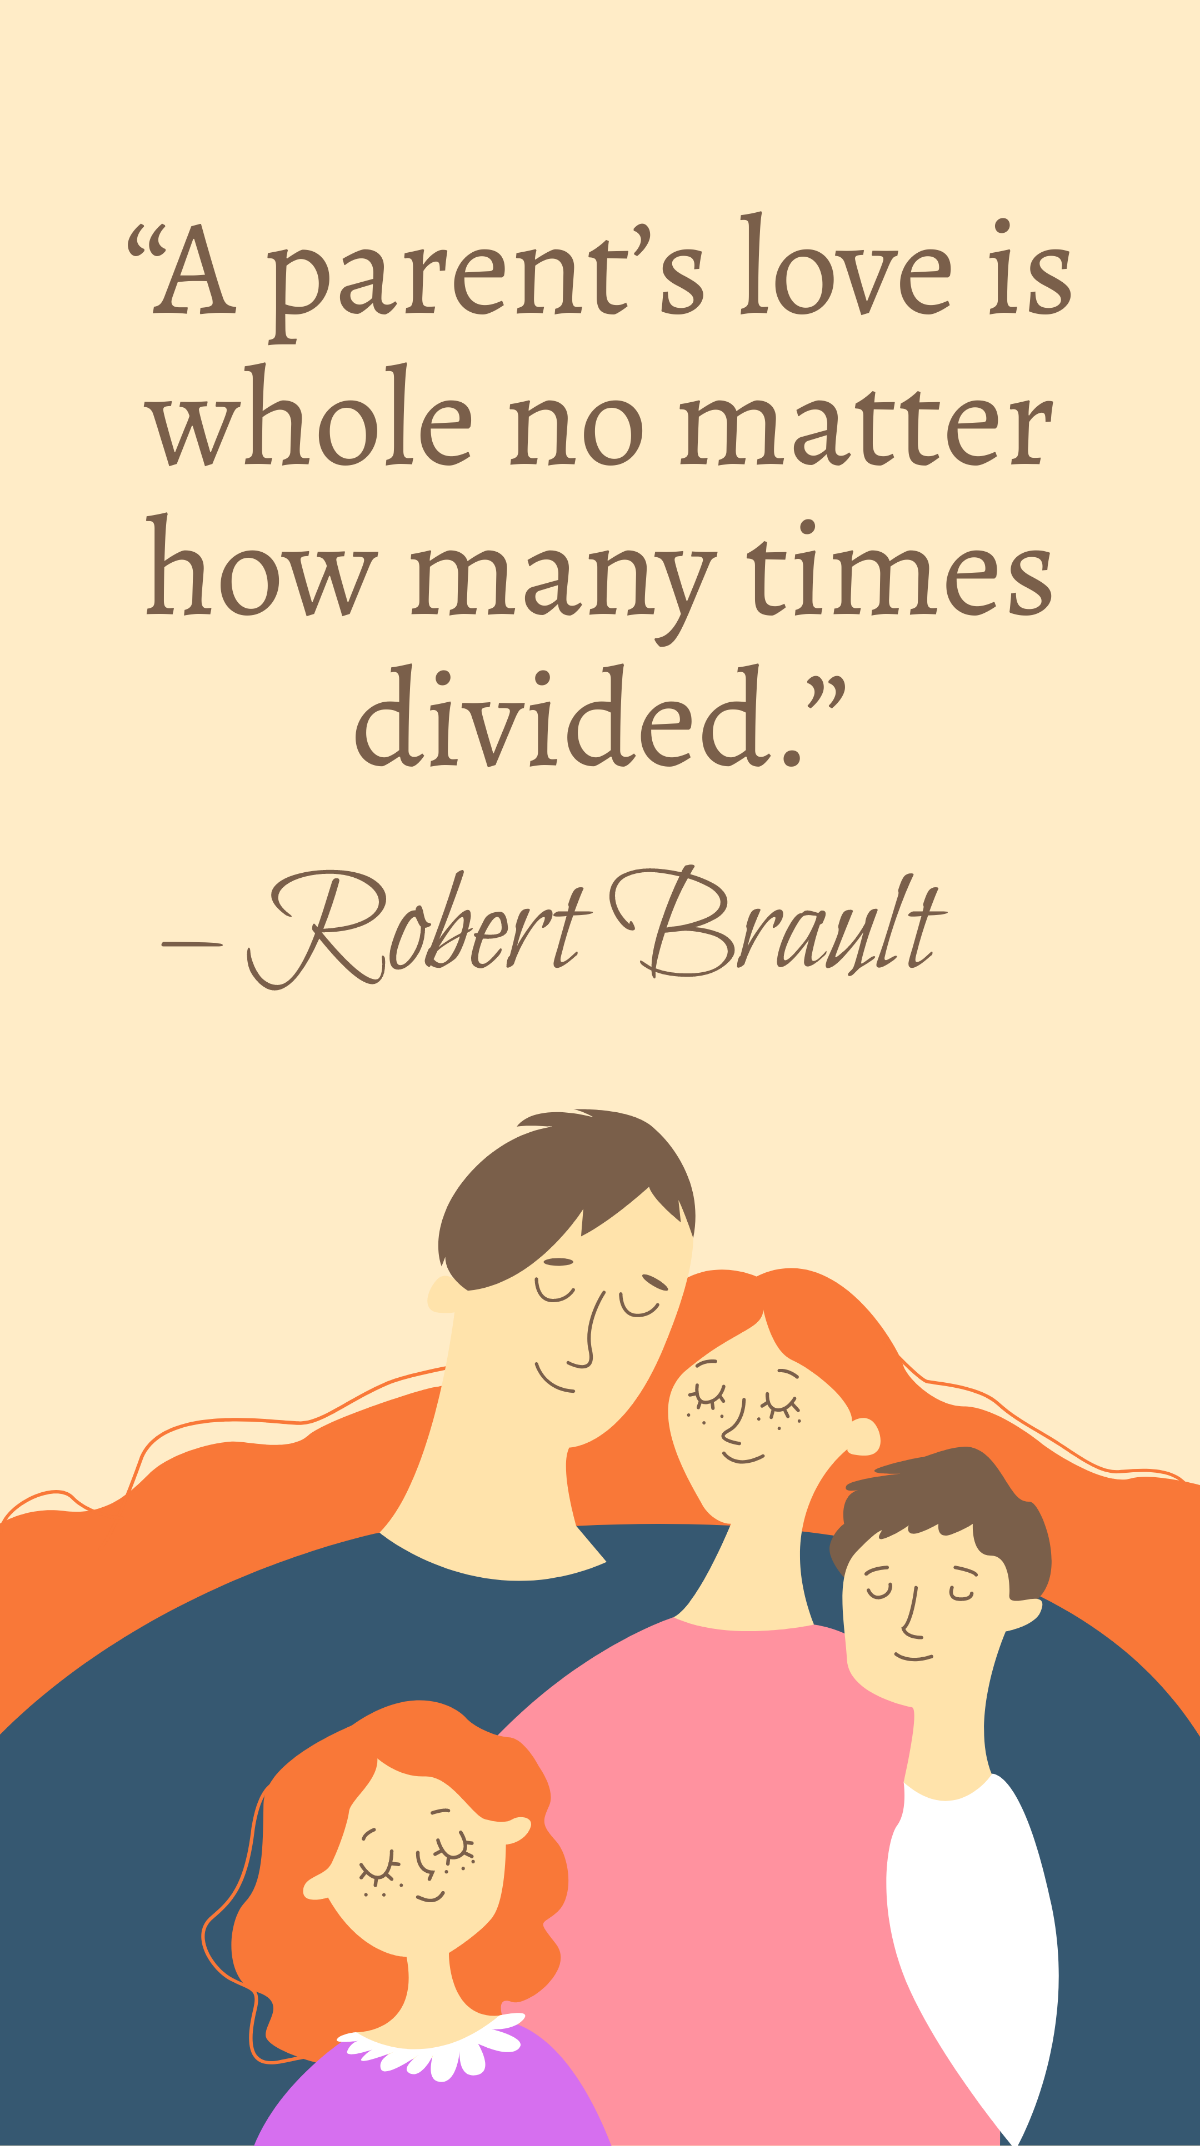 Robert Brault - “A parent’s love is whole no matter how many times divided.” Template